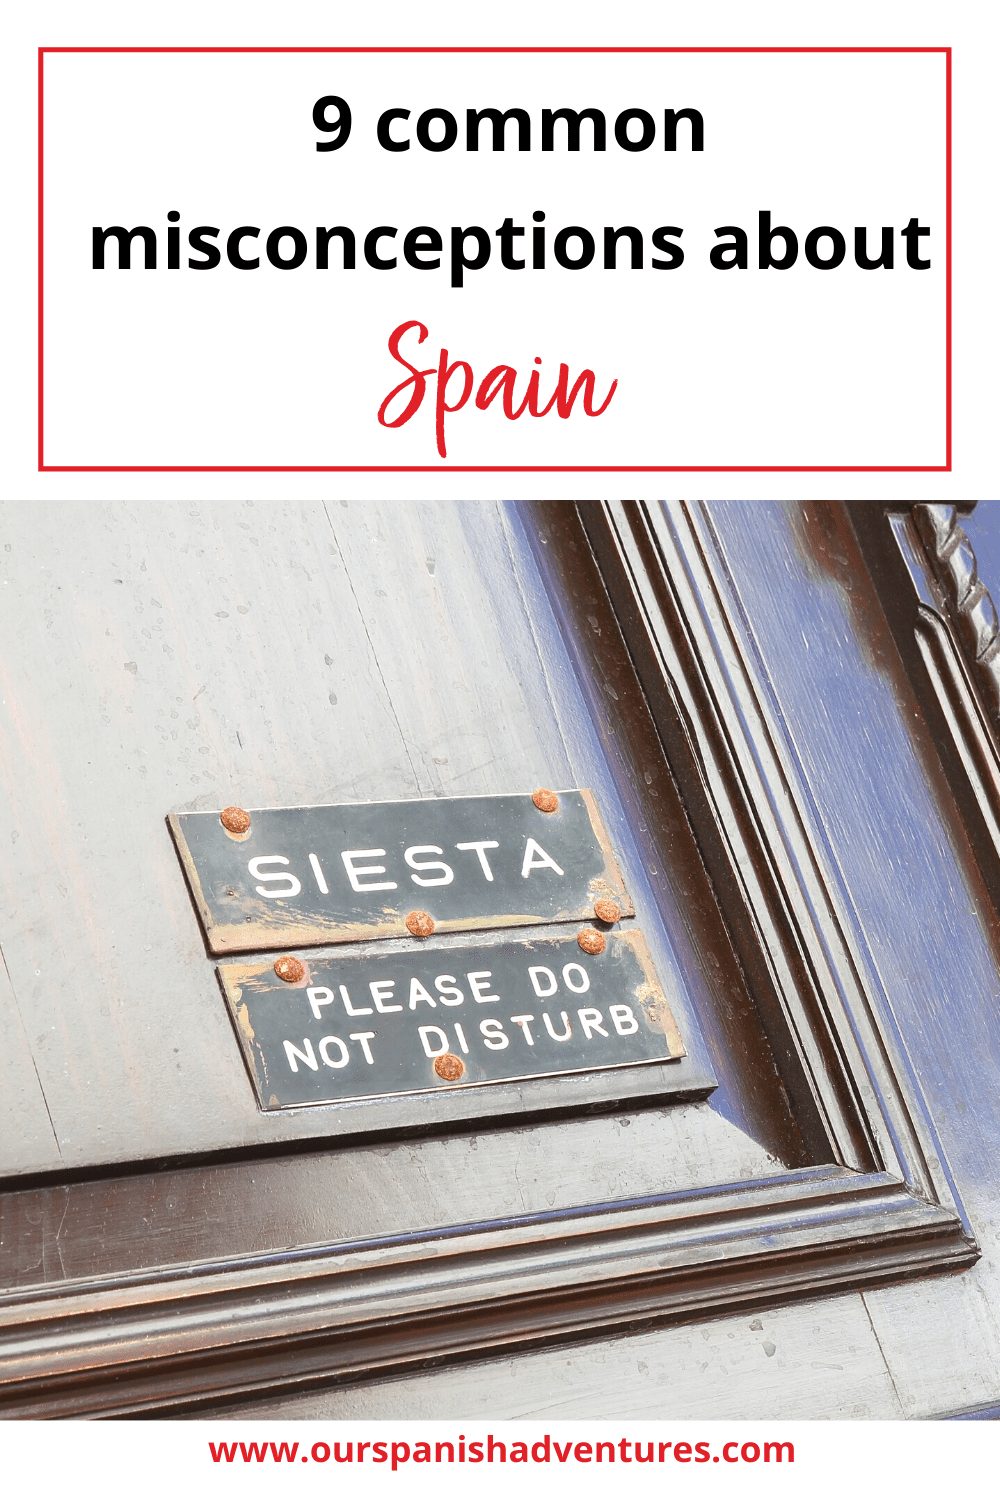 9 common misconceptions about Spain | Our Spanish Adventures